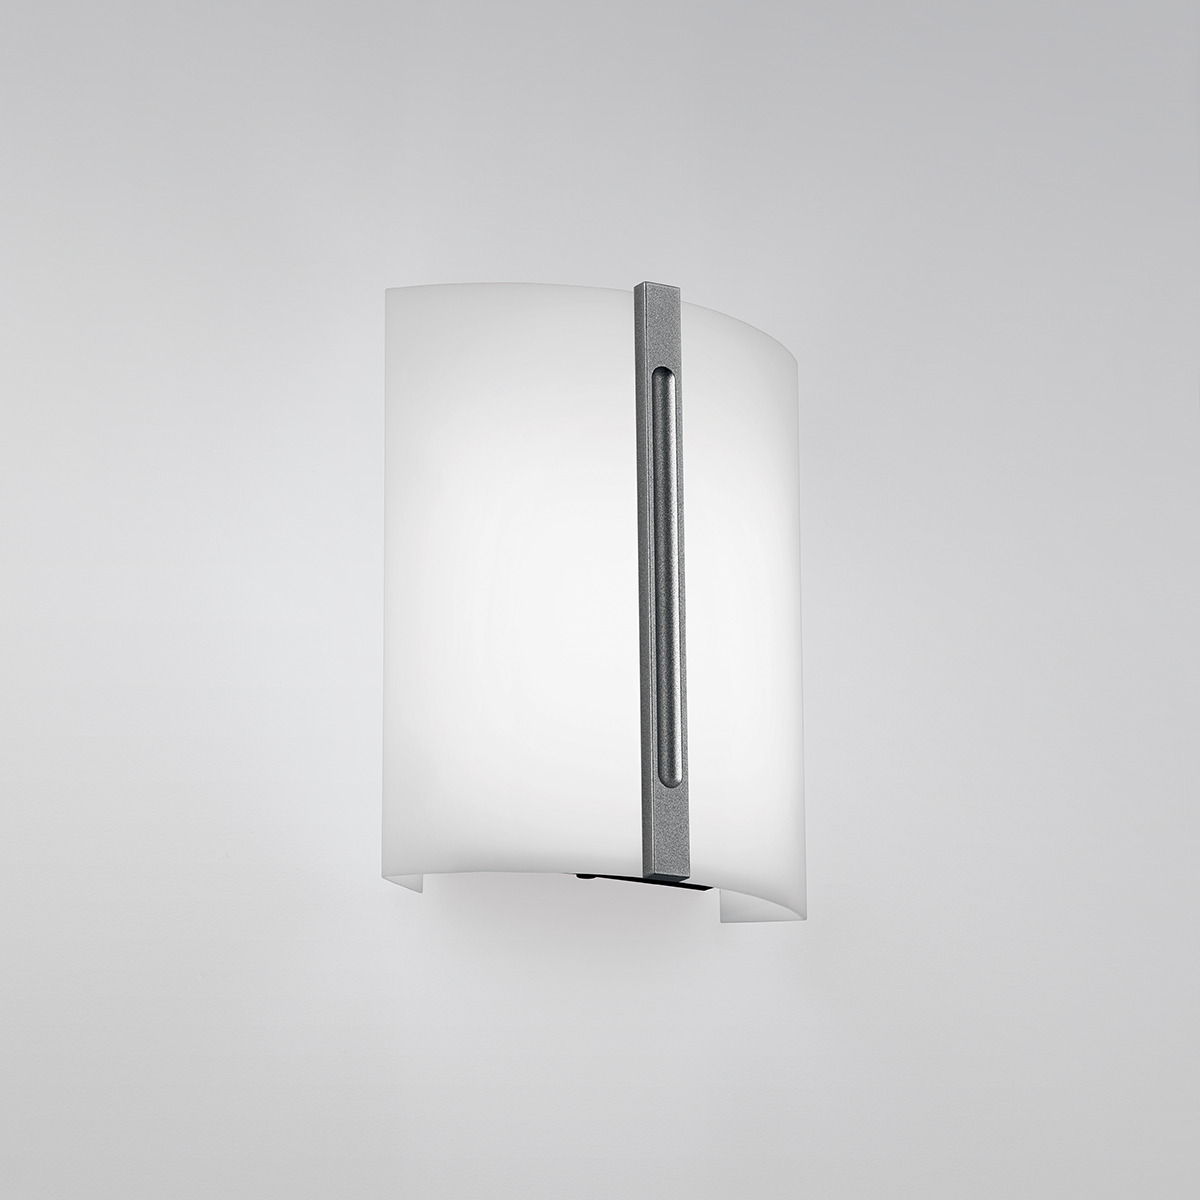 A small luminous wall sconce with a metal accent bar in the center